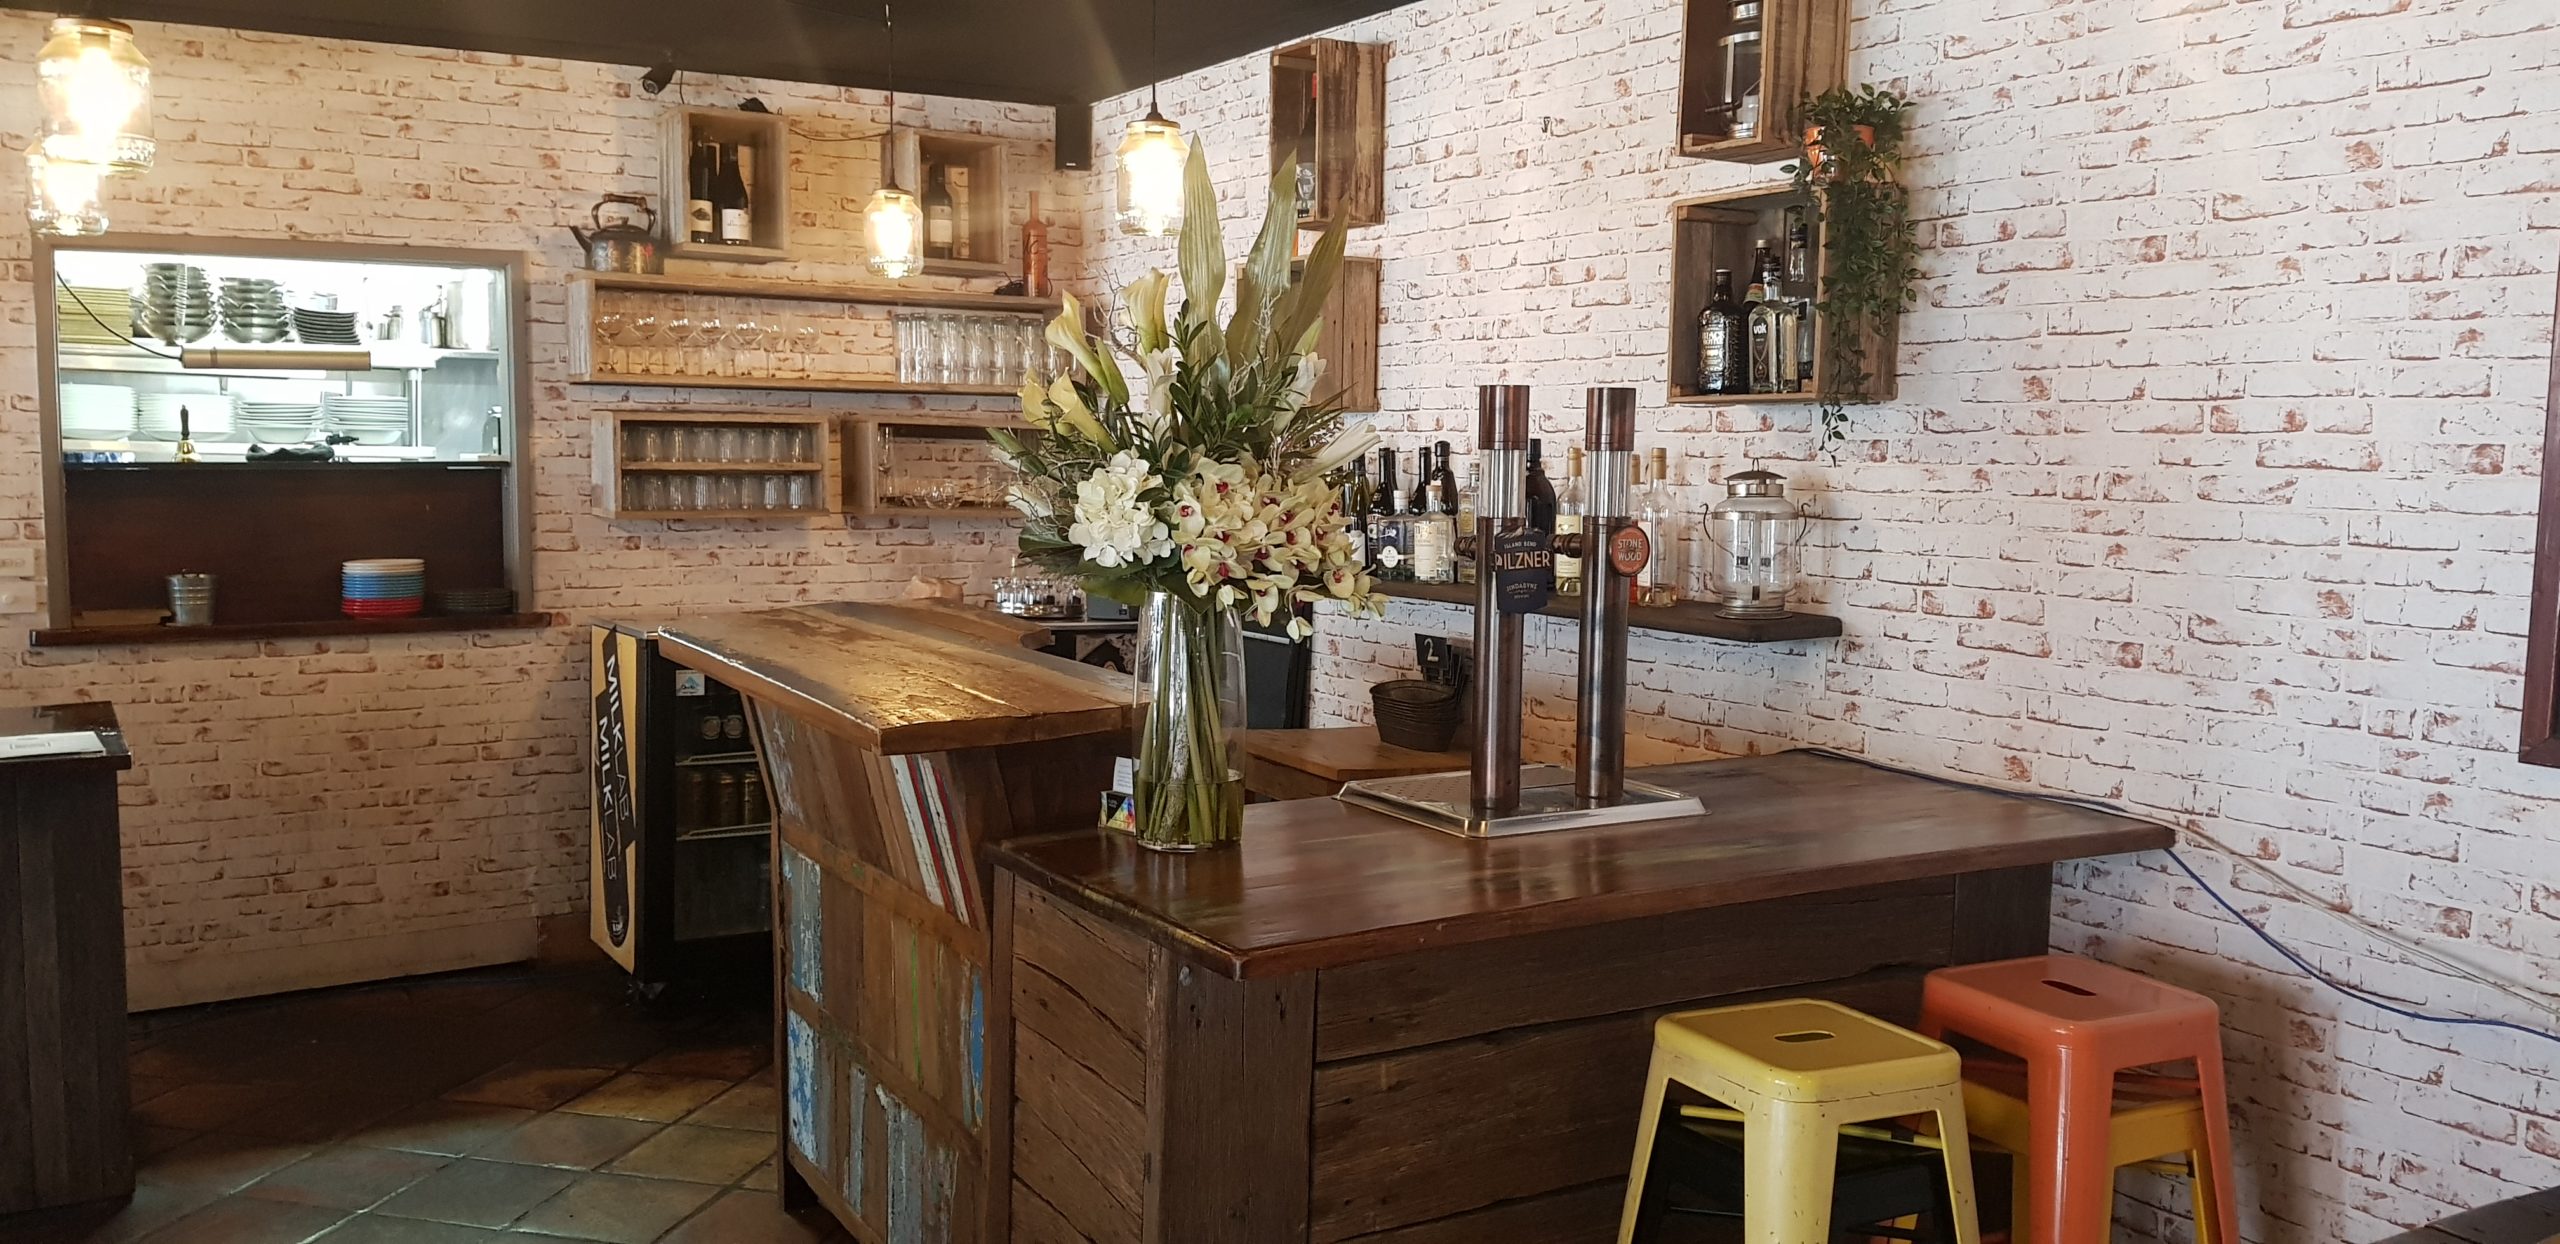 Unique & Quirky Cafe in the Heart of Thredbo Village Square <br> PRICE DROP: $290,000